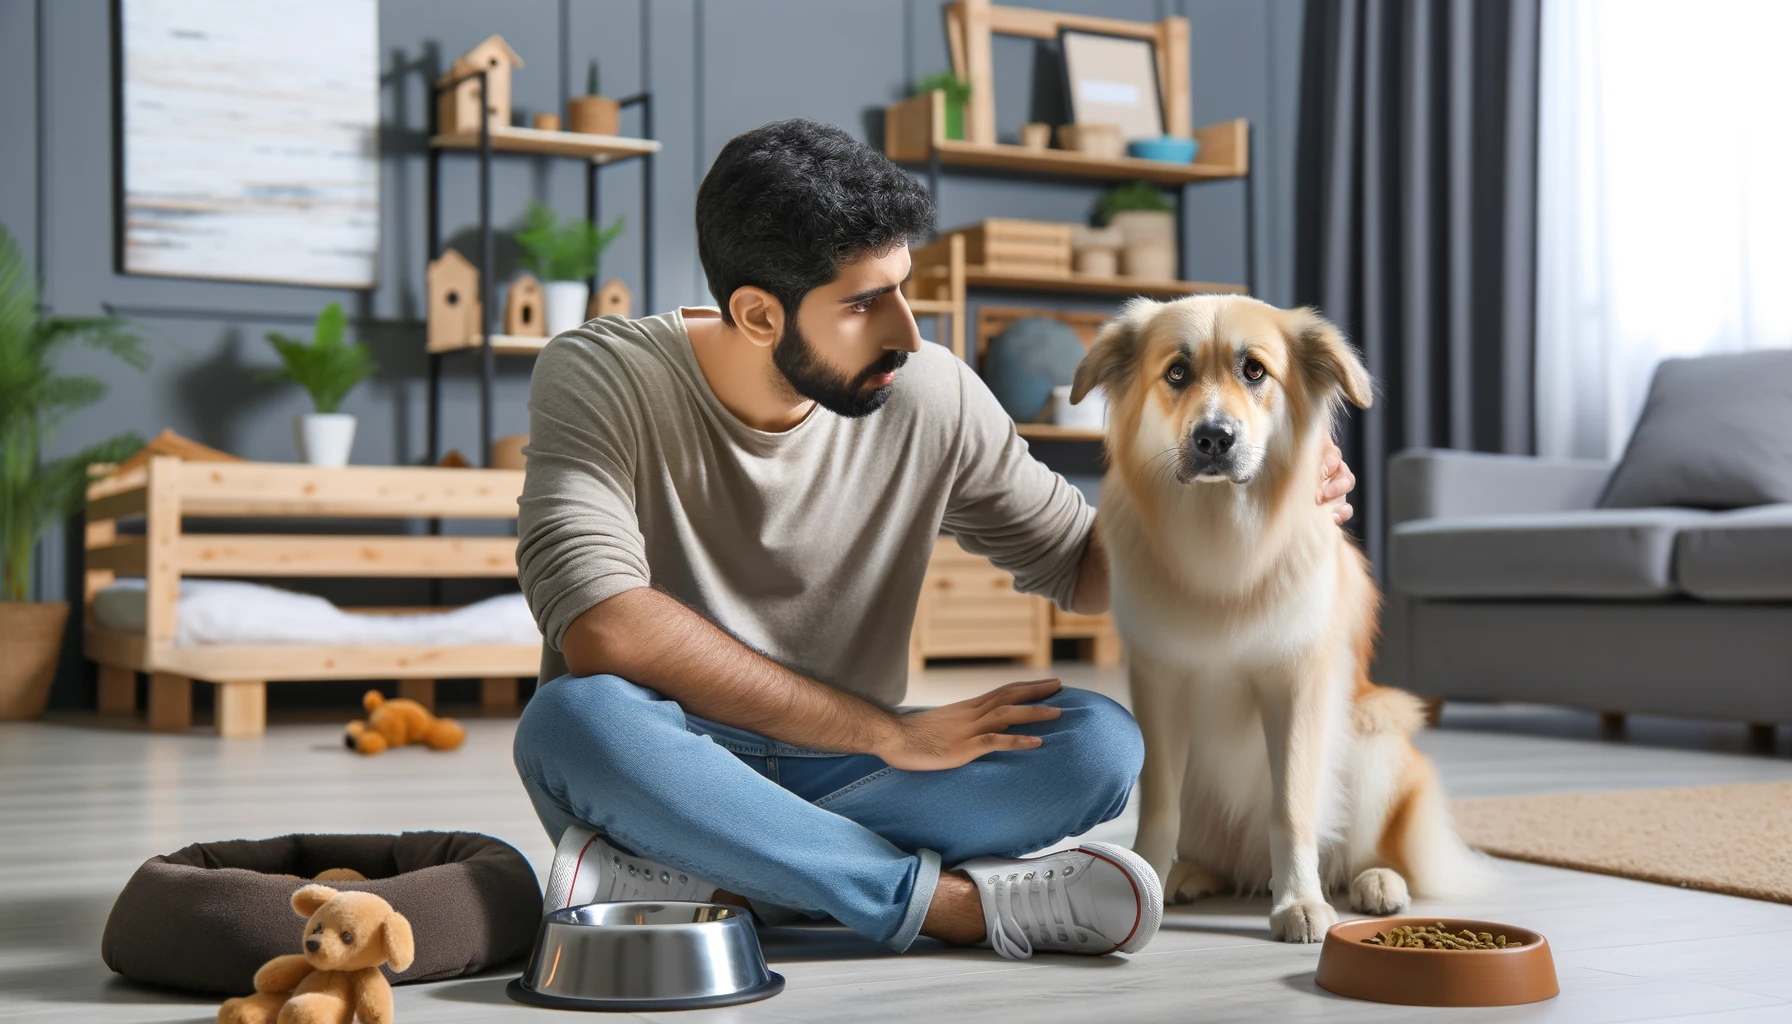 A realistic photograph of a Middle Eastern man taking care of a dog in a home setting. The dog looks anxious and the man is gently comforting it. The room includes pet toys, a bed, and food bowls. The atmosphere is caring and supportive.